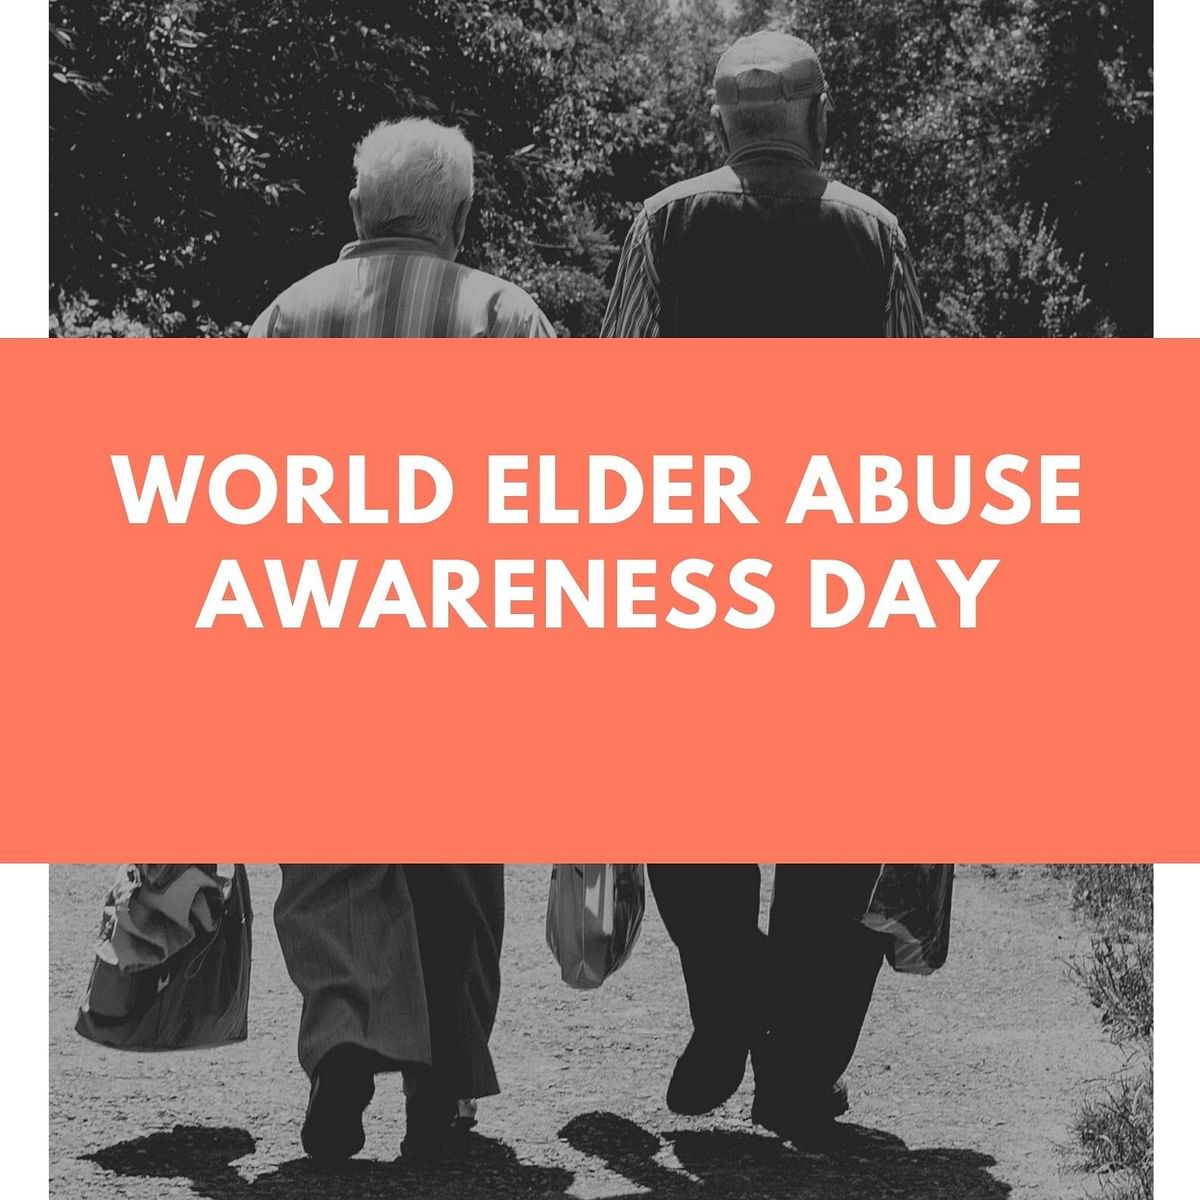 World Elder Abuse Awareness Day was officially recognized by UNGA in December 2011.